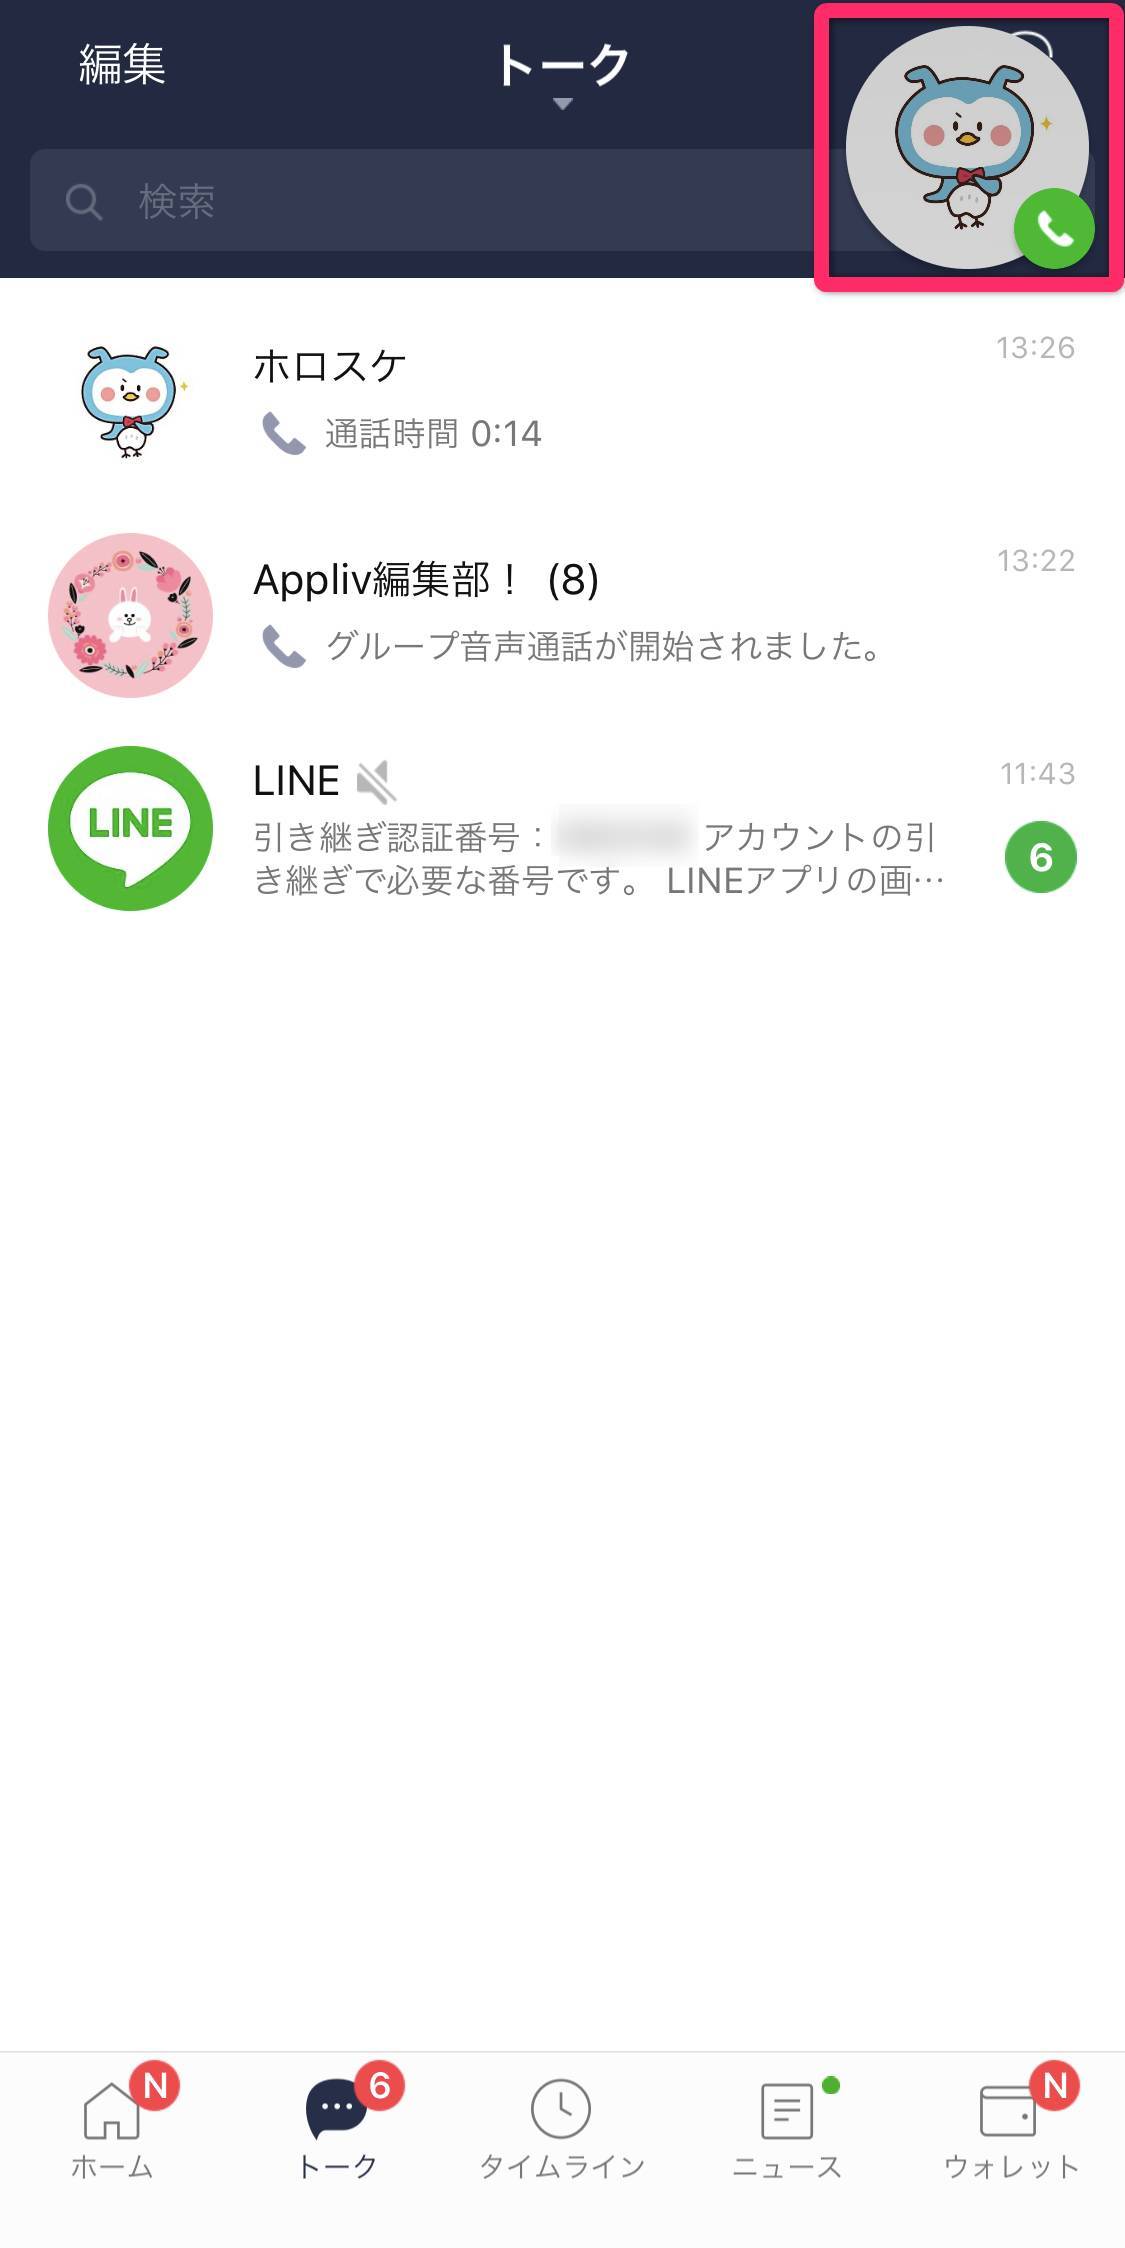 Lineで電話をかける方法 無料通話の発信 応答のやり方 Line Outの違いは Appliv Topics